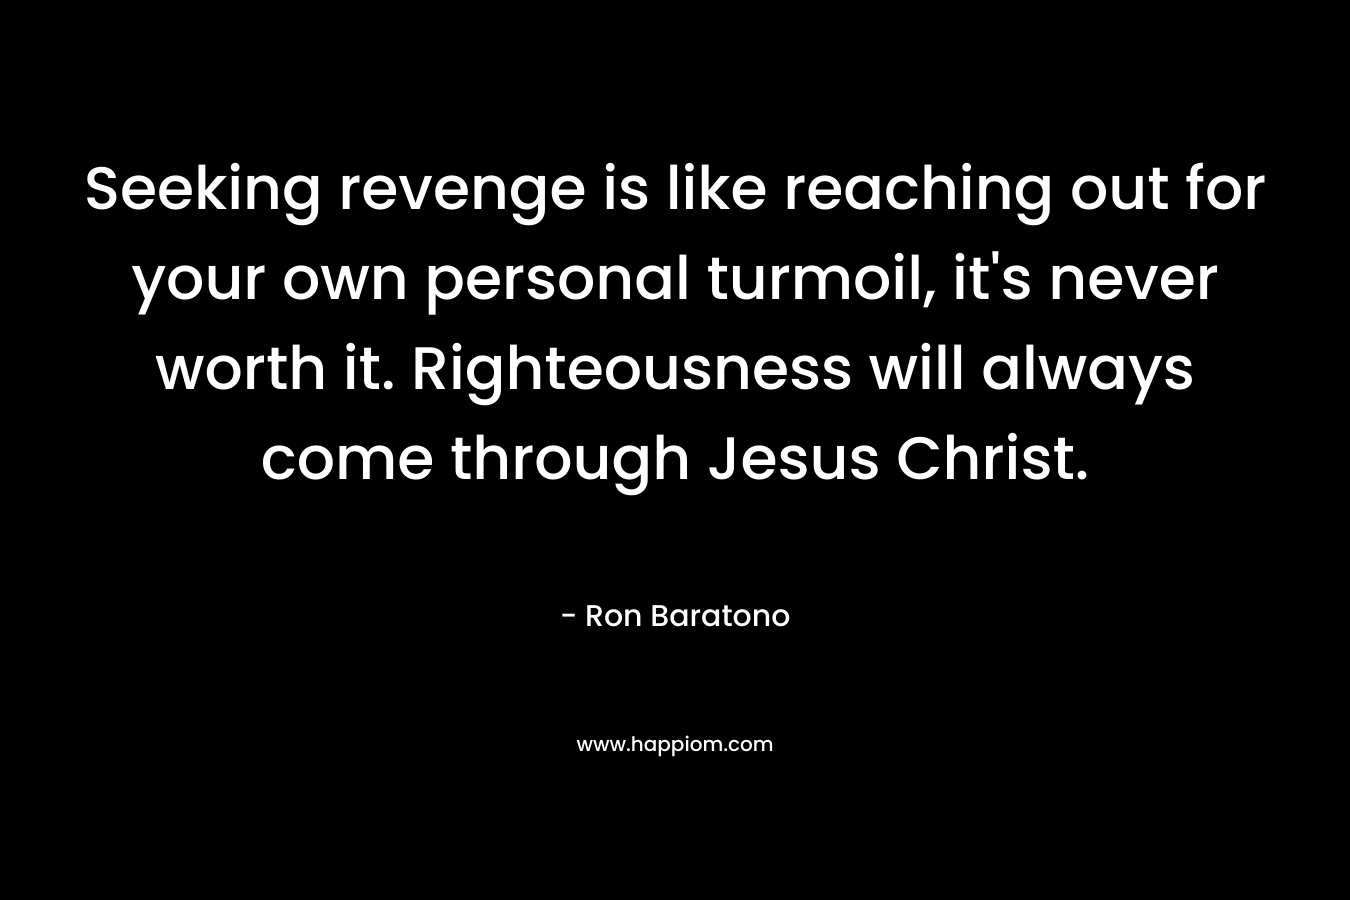 Seeking revenge is like reaching out for your own personal turmoil, it’s never worth it. Righteousness will always come through Jesus Christ. – Ron Baratono